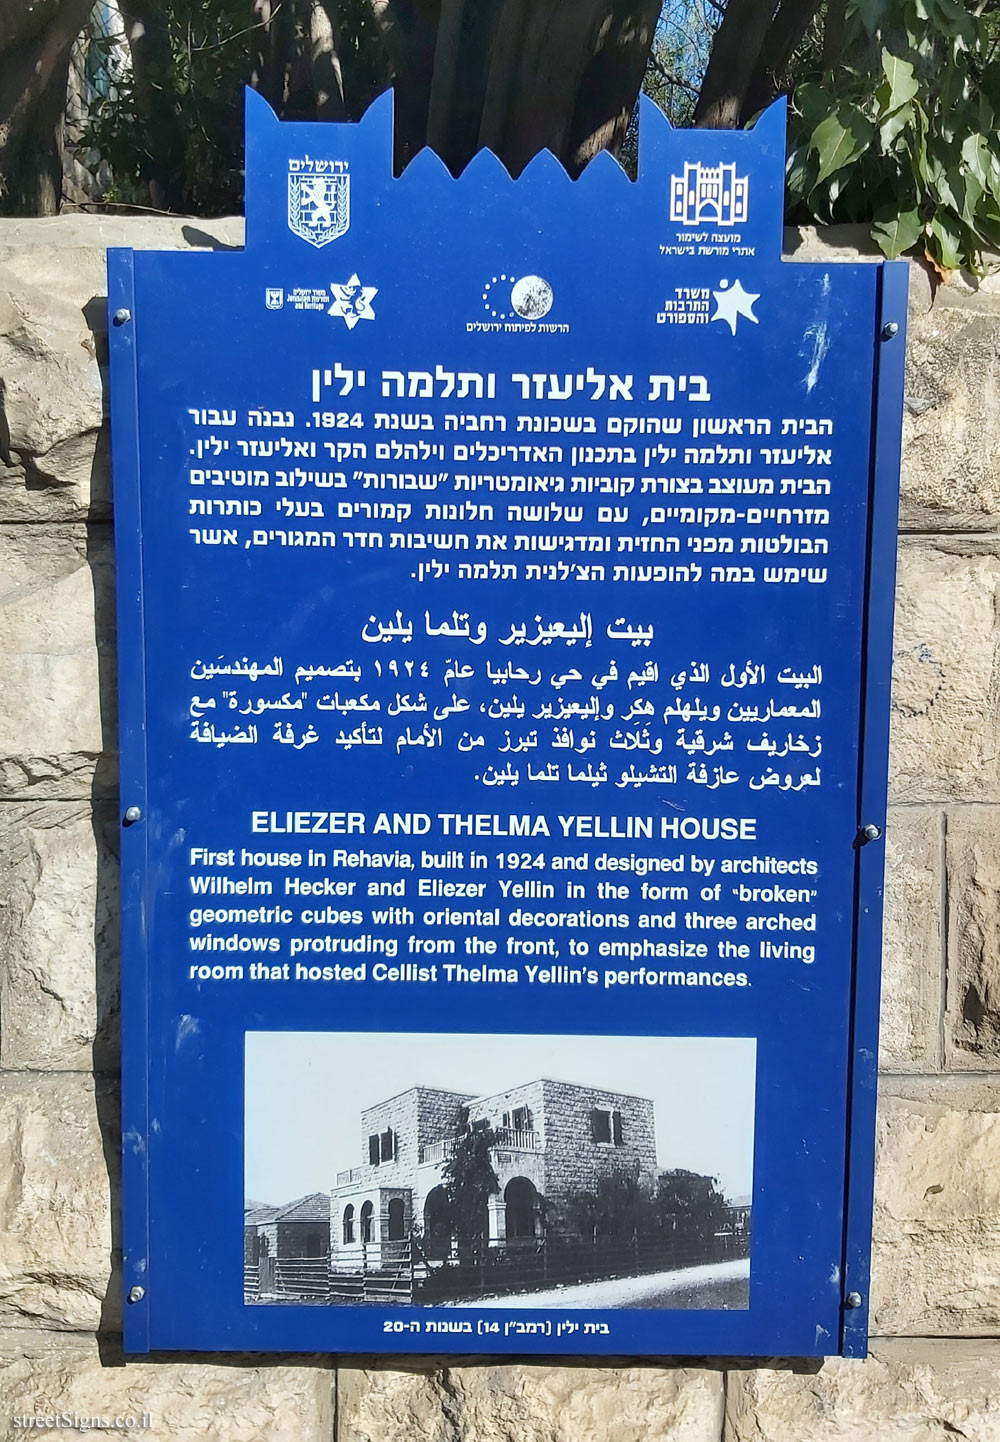 Jerusalem - Heritage Sites in Israel - Eliezer and Thelma Yellin House